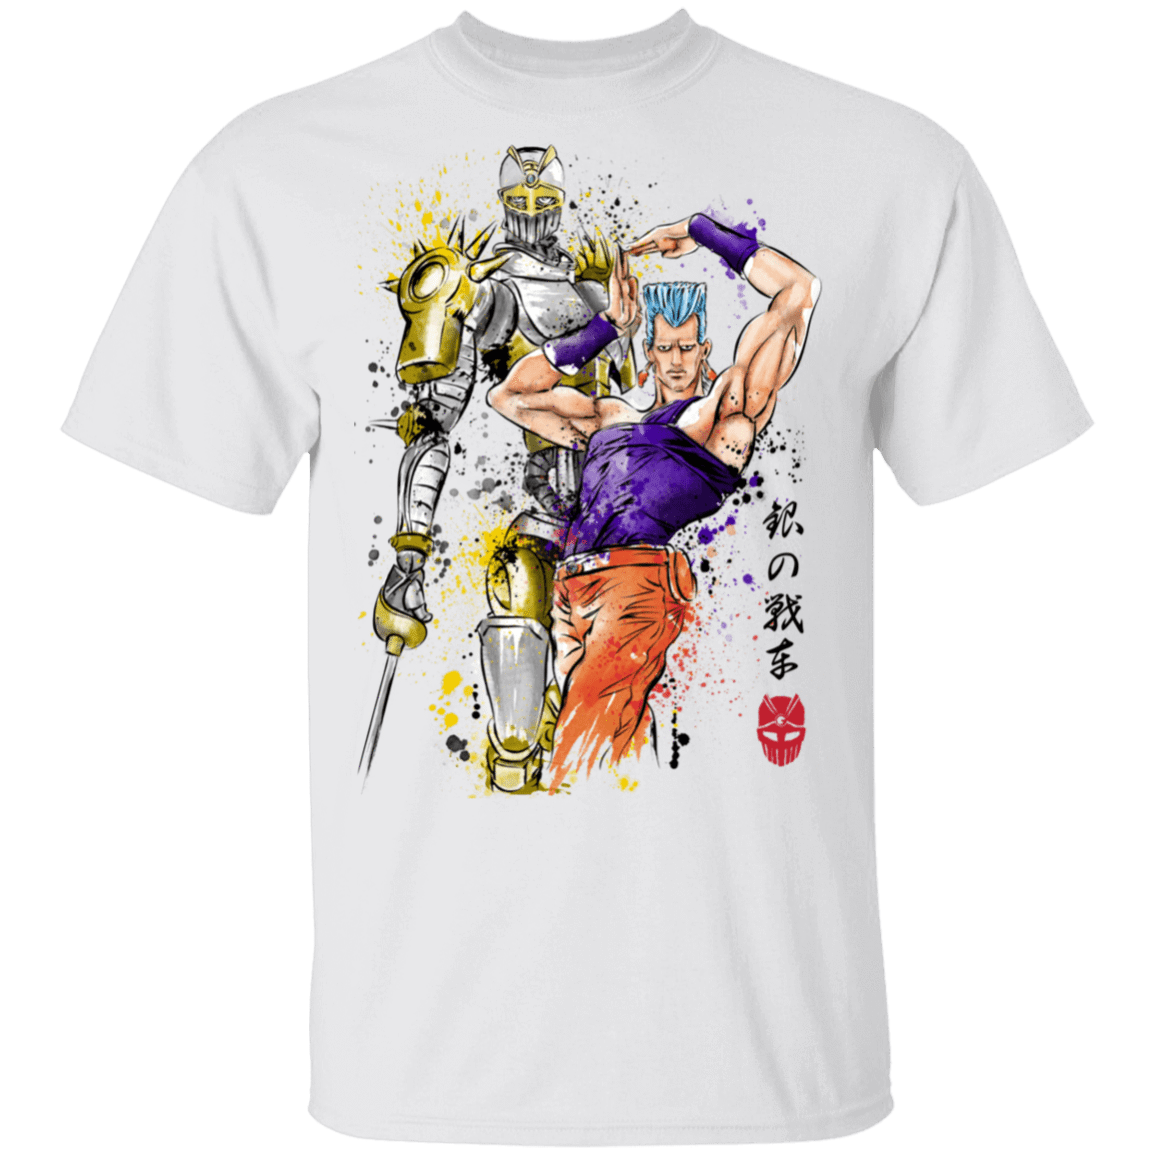 T-Shirts White / S Silver Chariot Watercolor T-Shirt